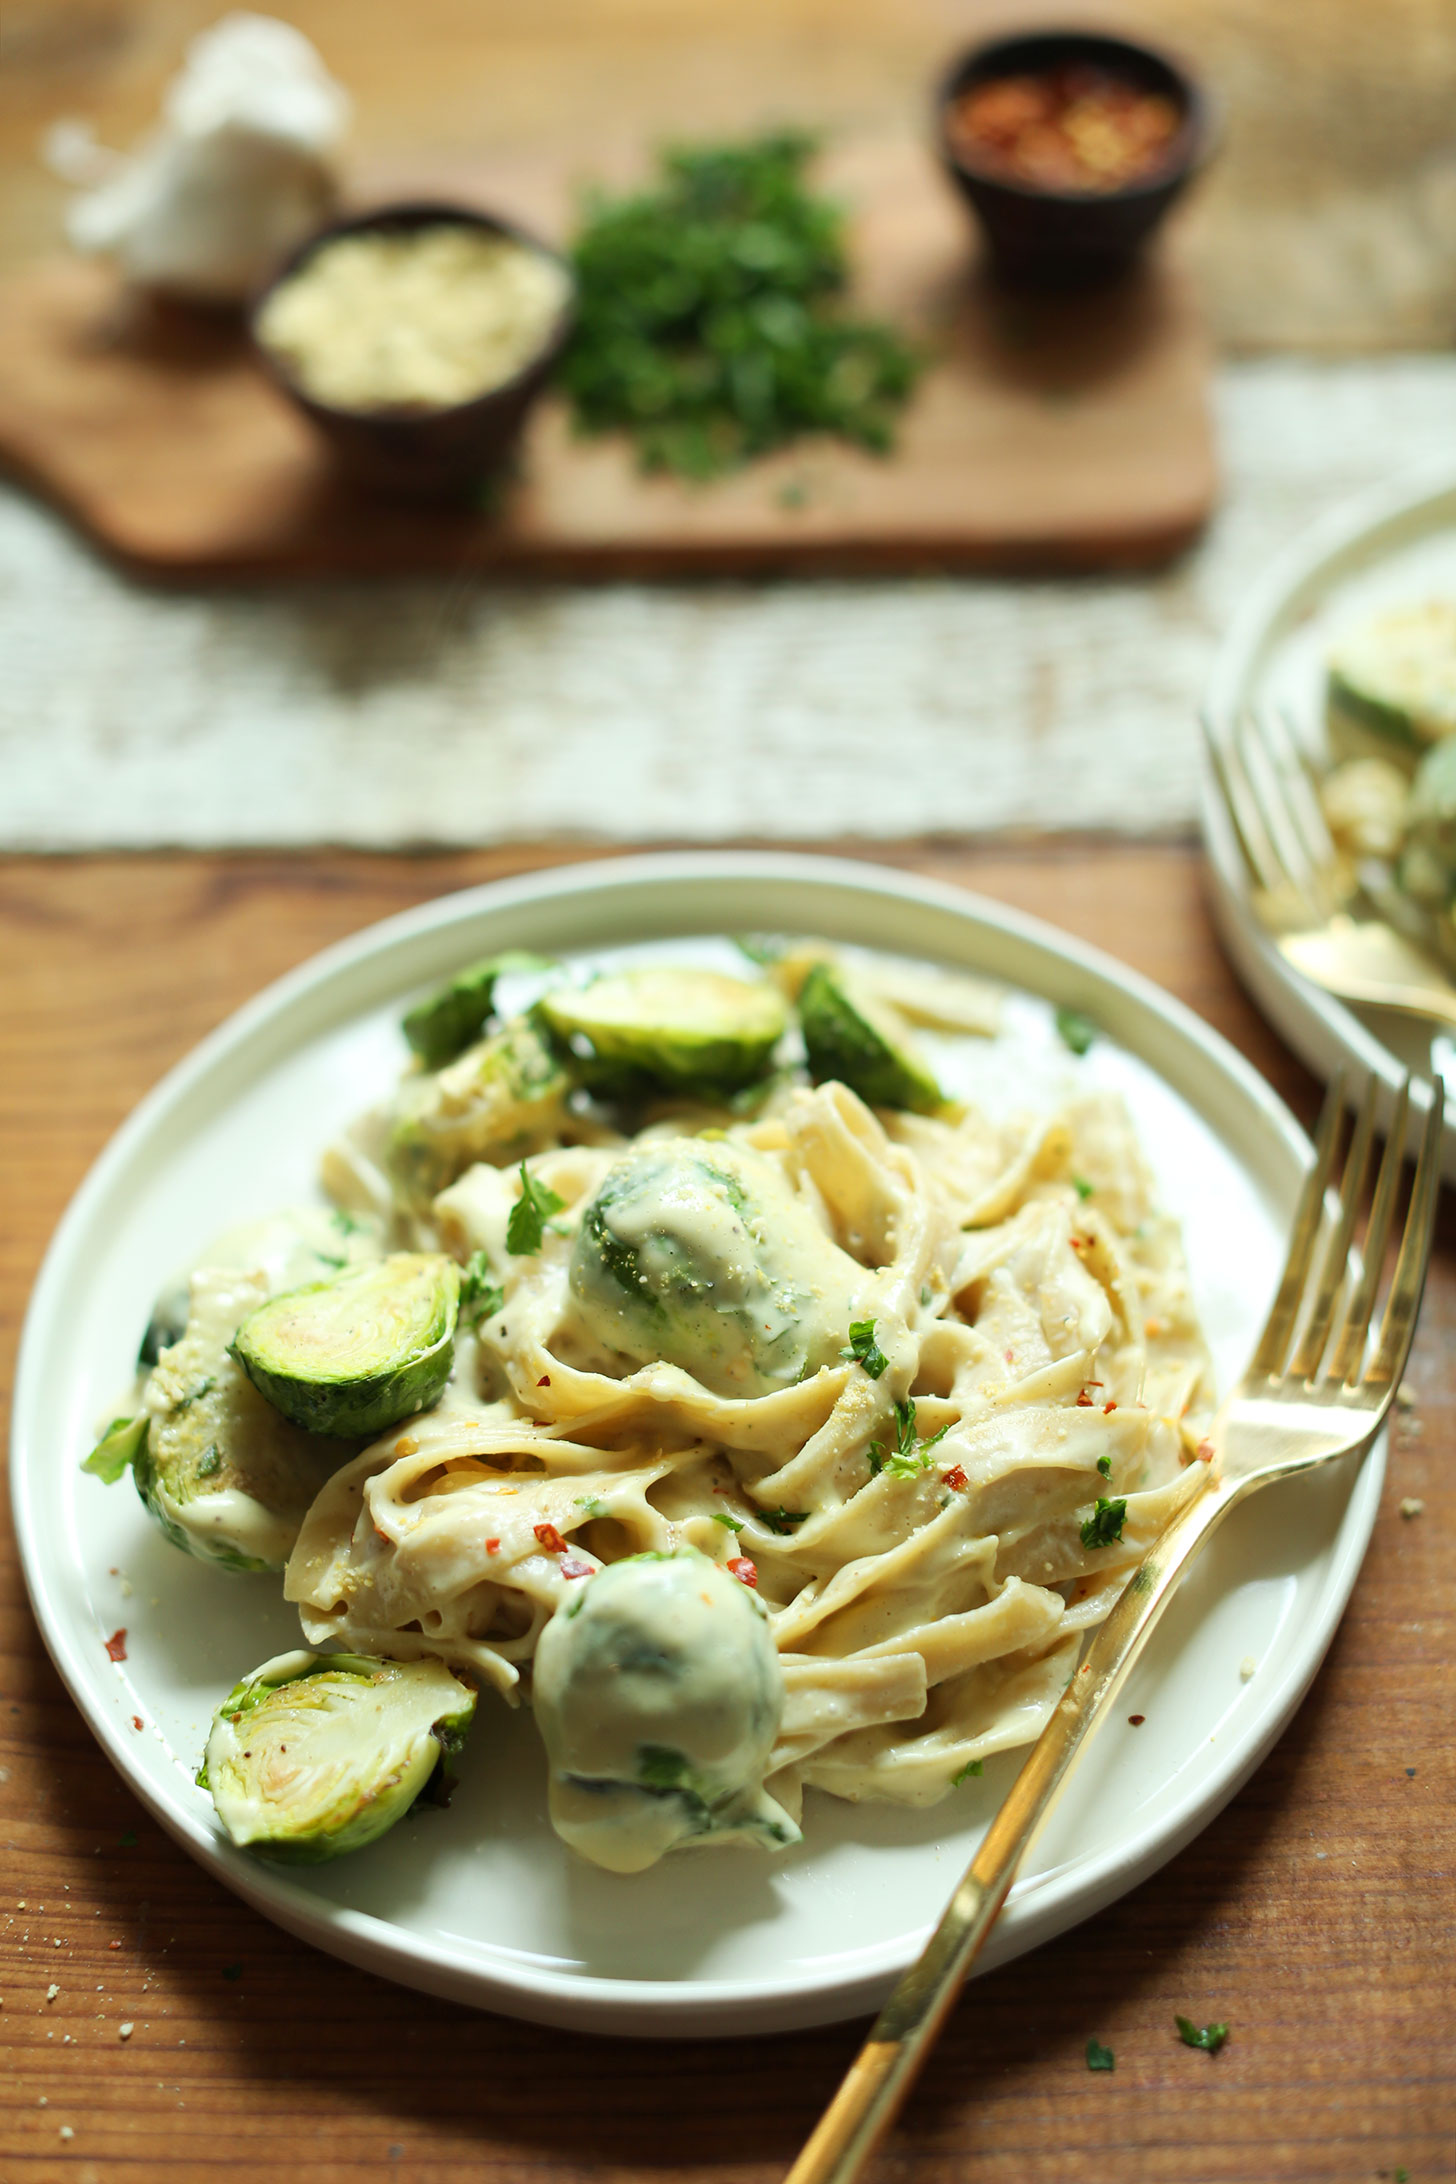 Hearty serving of our comforting recipe of Vegan Garlic Alfredo Pasta with Roasted Brussels Sprouts